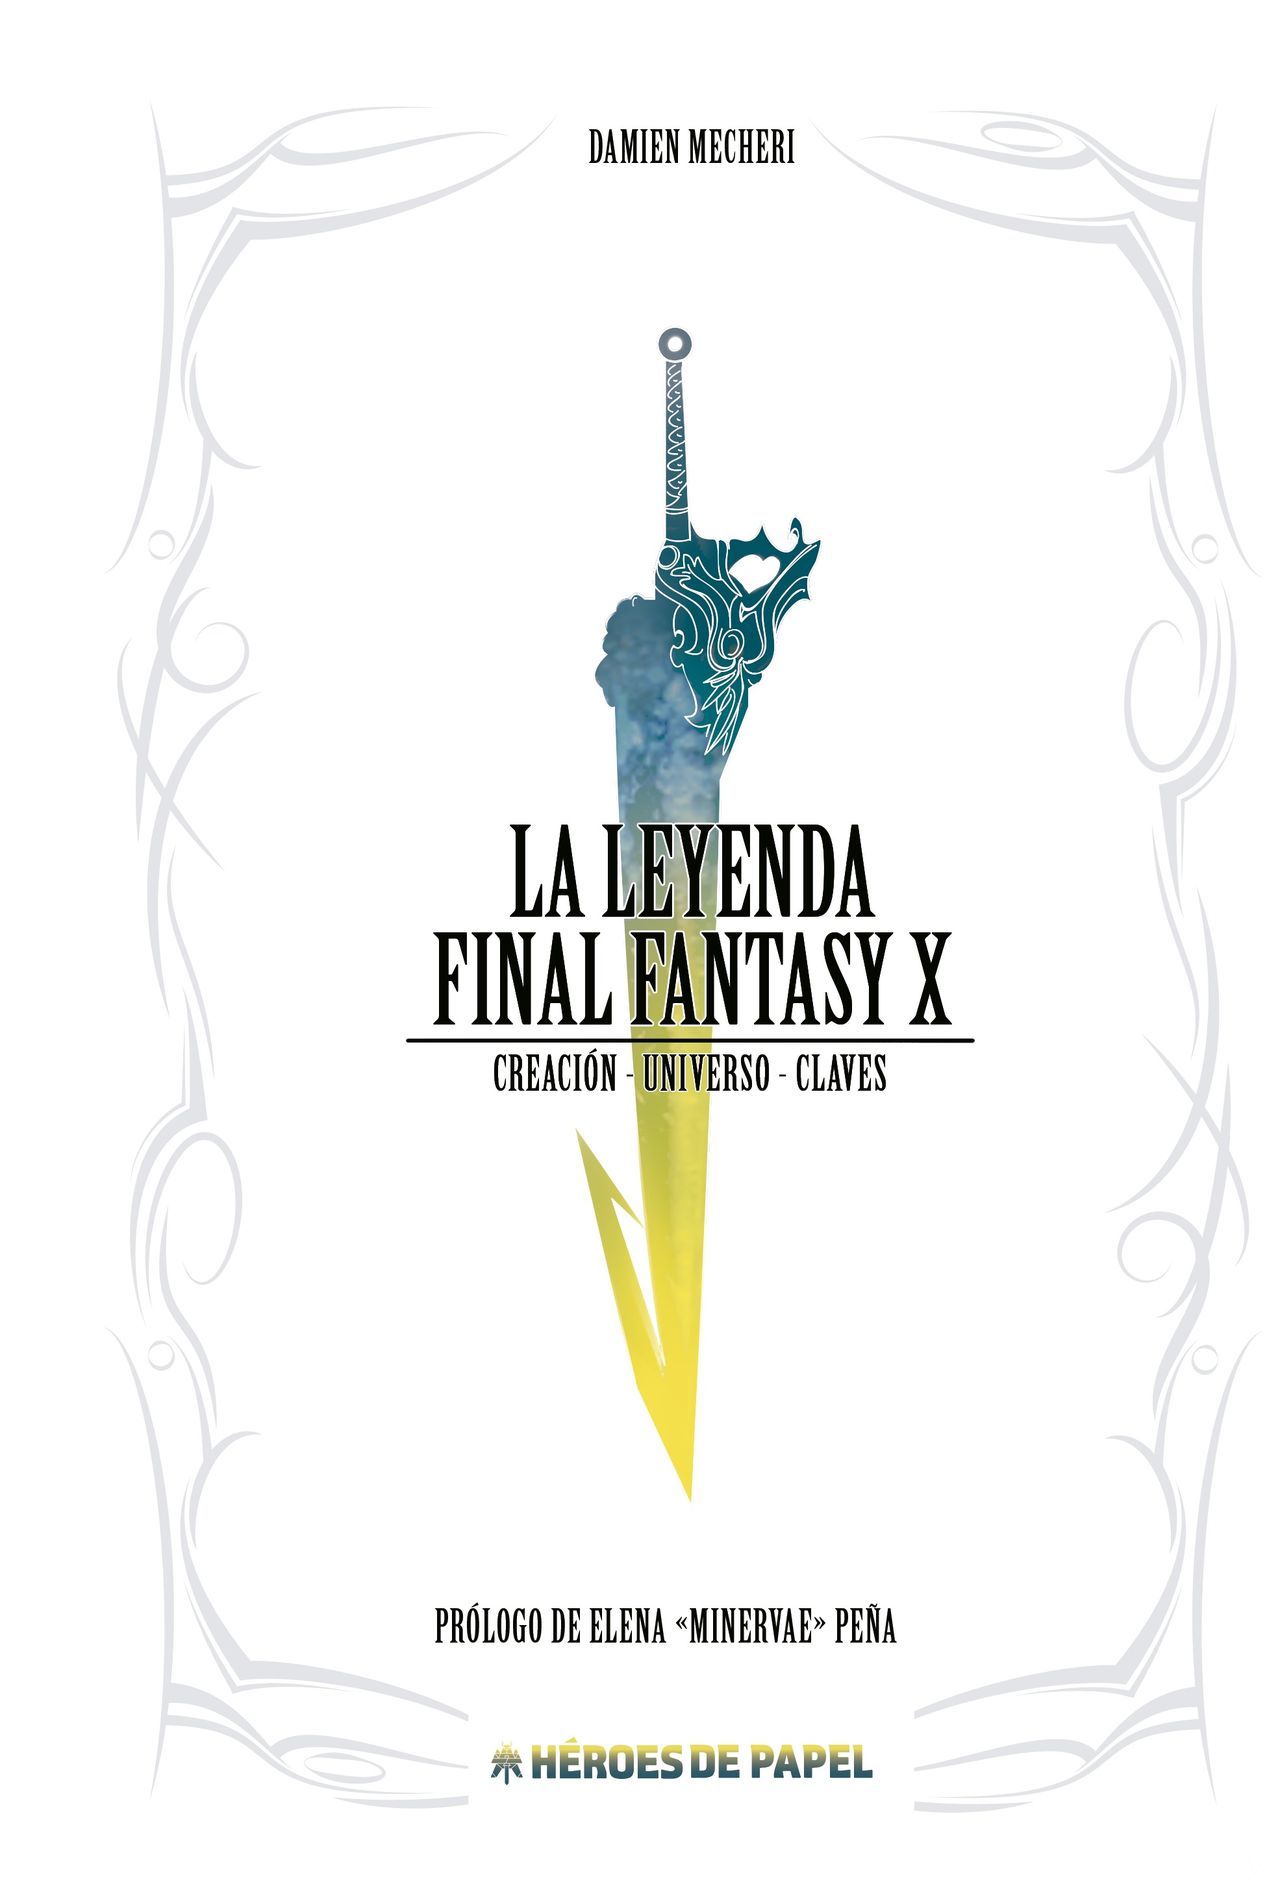 Open the reservation period of the book, The Legend Final Fantasy X